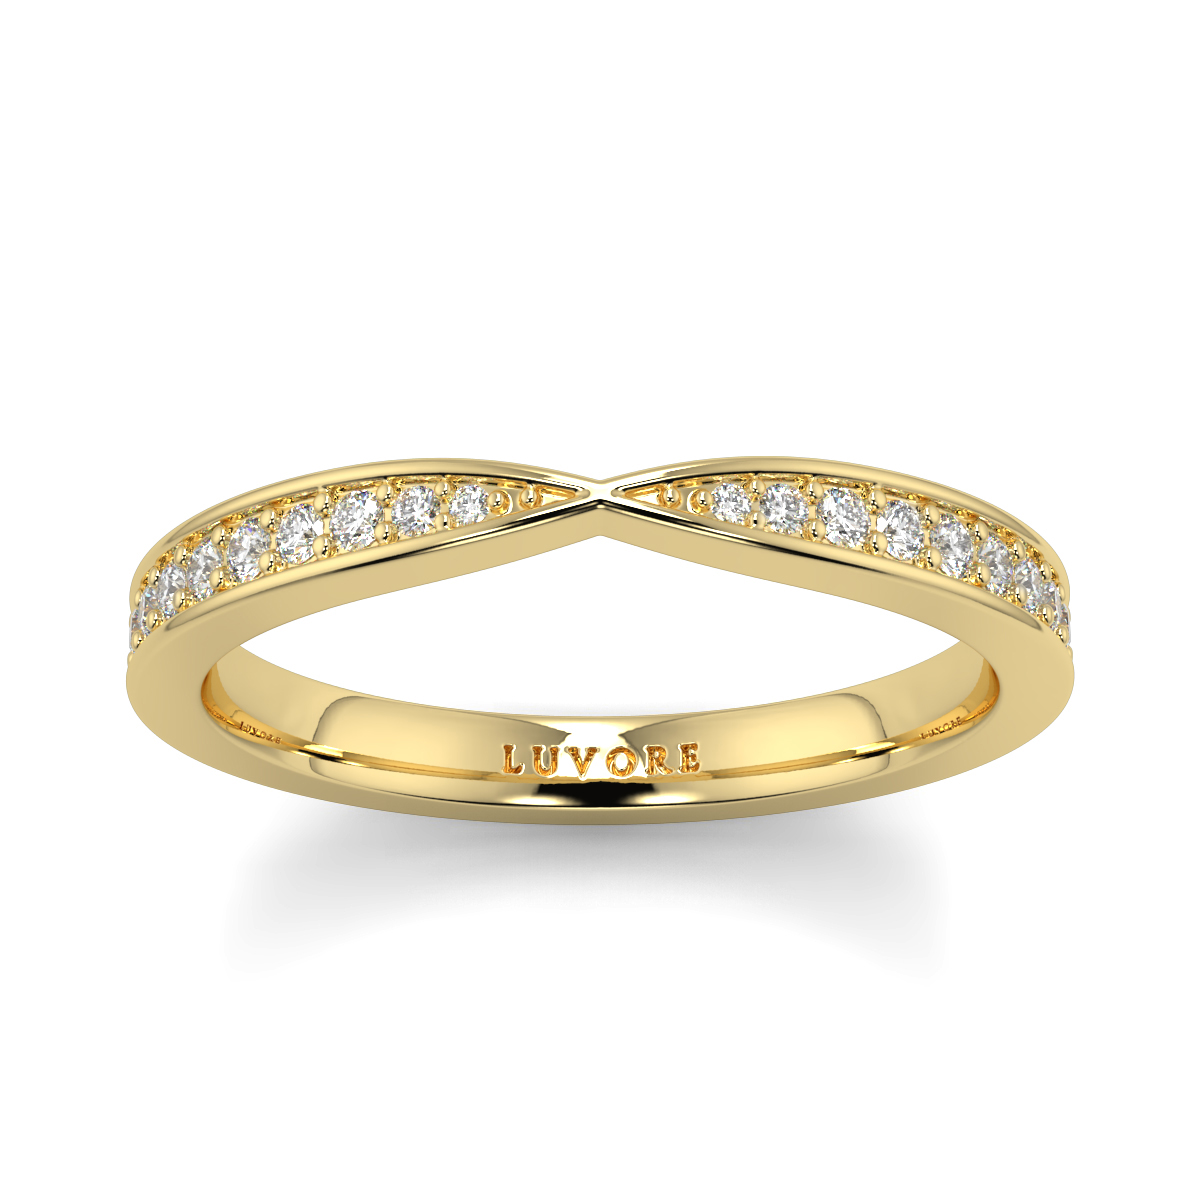 Wedding Band Ladies Diamond Shape To Fit Cross Over Ring Set